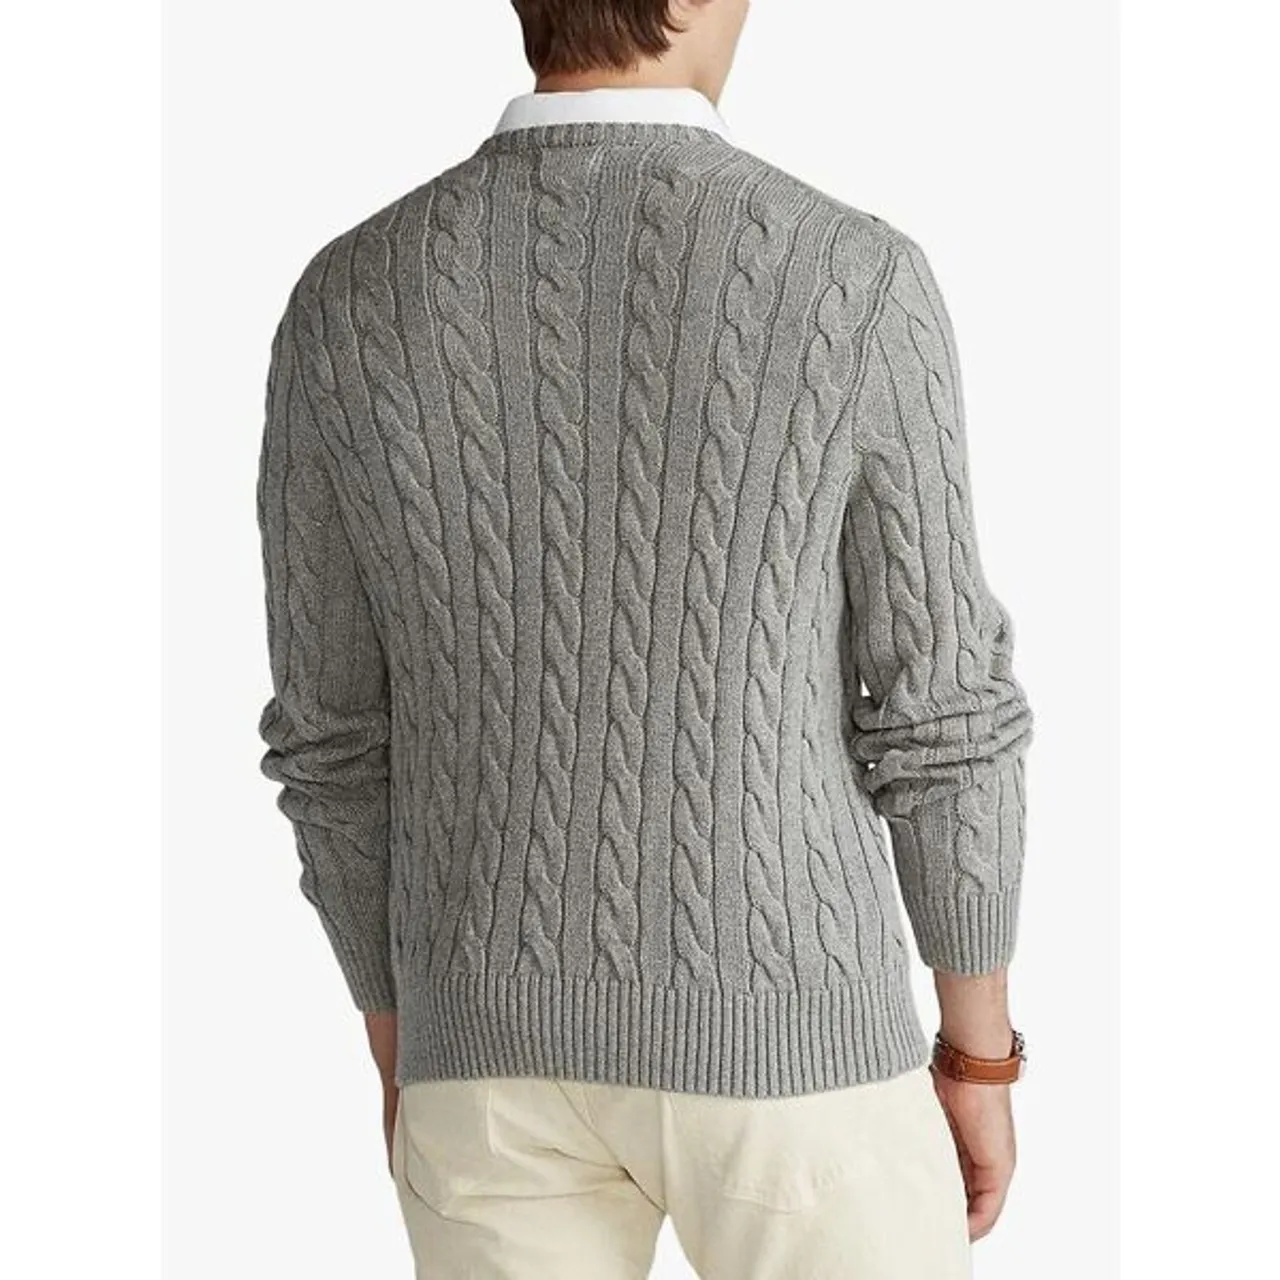 Polo Ralph Lauren Cotton Cable Knit Jumper - Fawn Frey Heather - Male